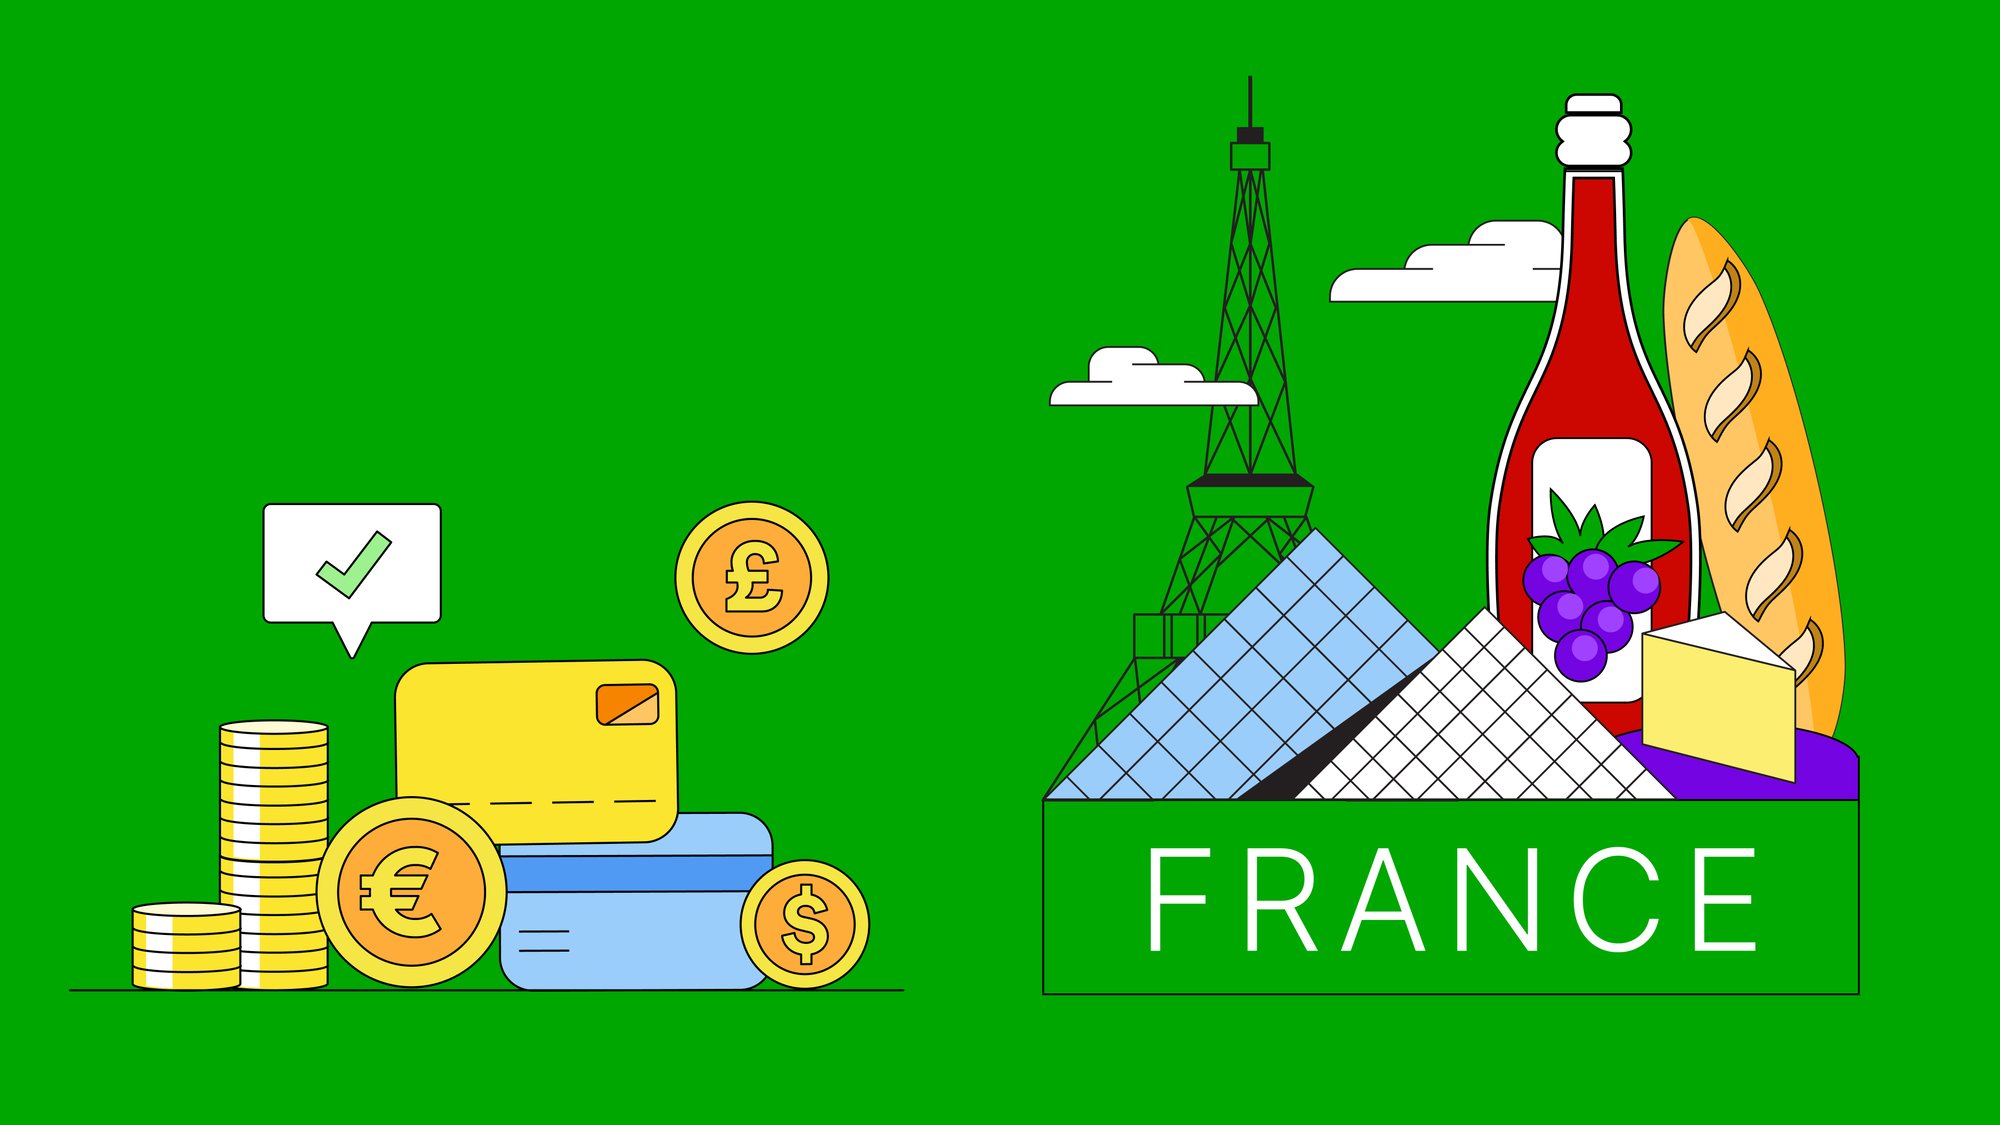 Open a French bank account in France : available to non-residents